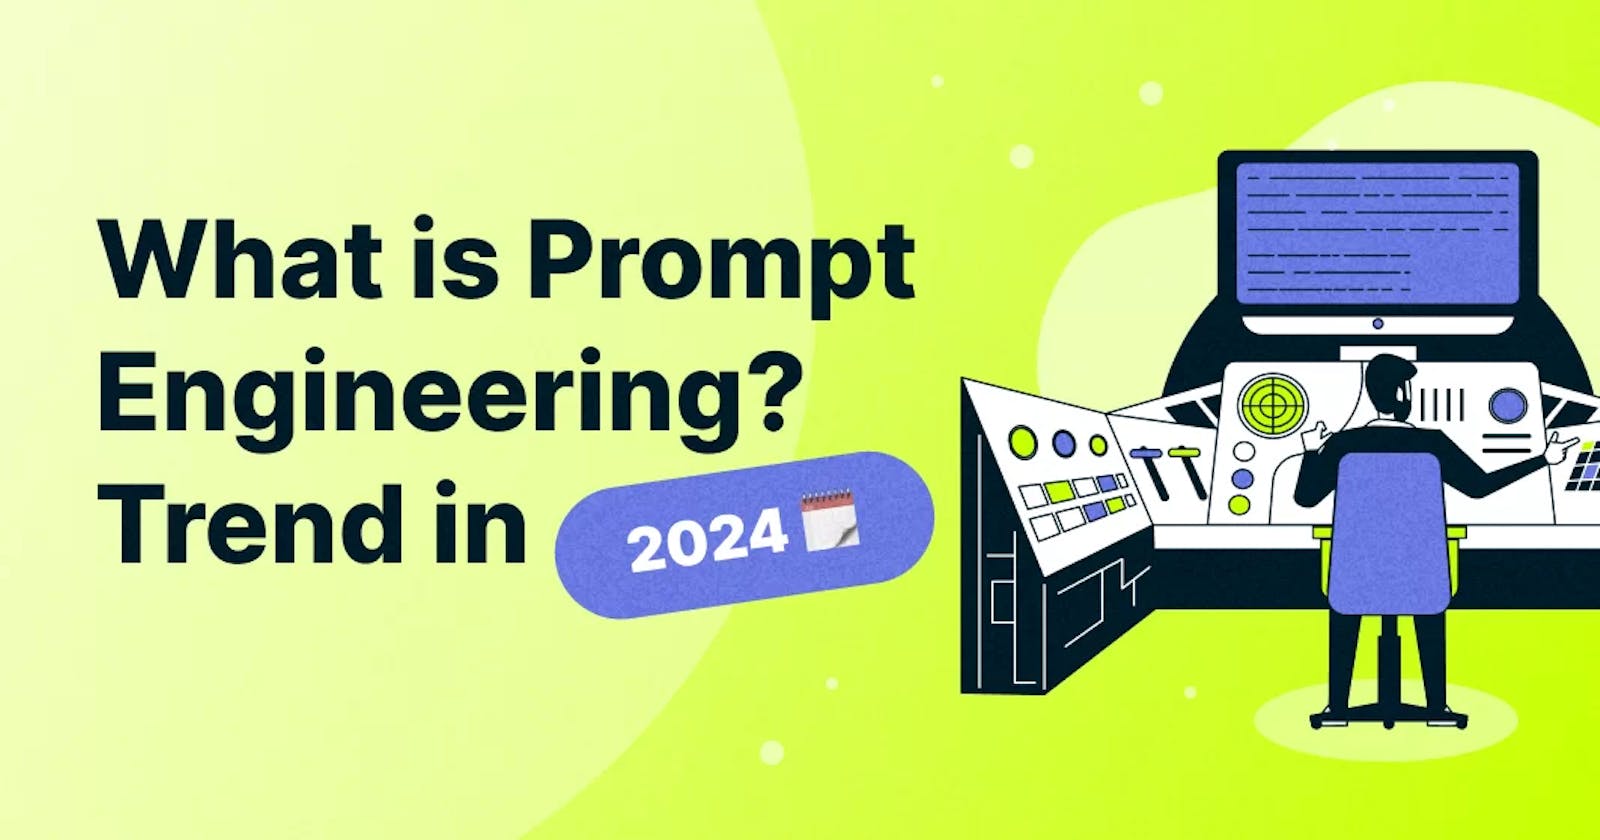 What is Prompt Engineering? Trend in 2024